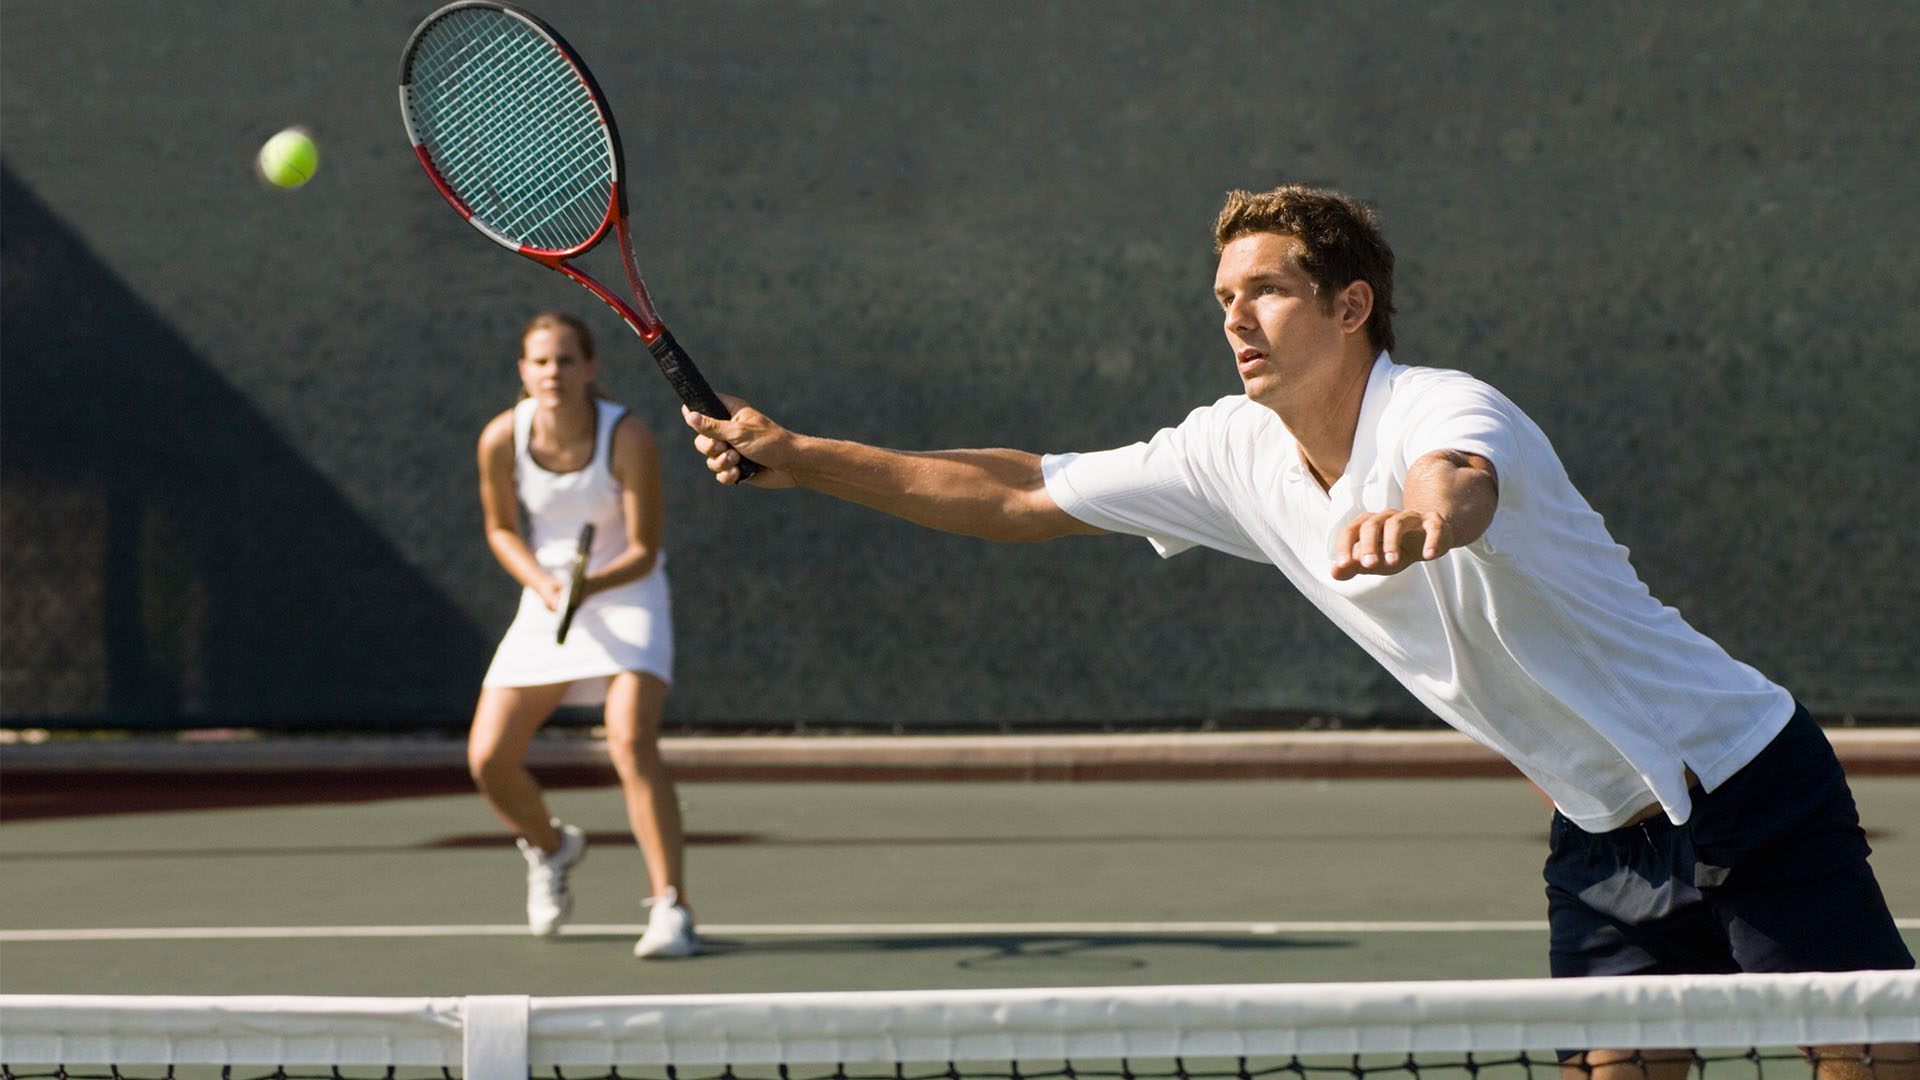 Mixed doubles tennis players with male reaching to hit a ball